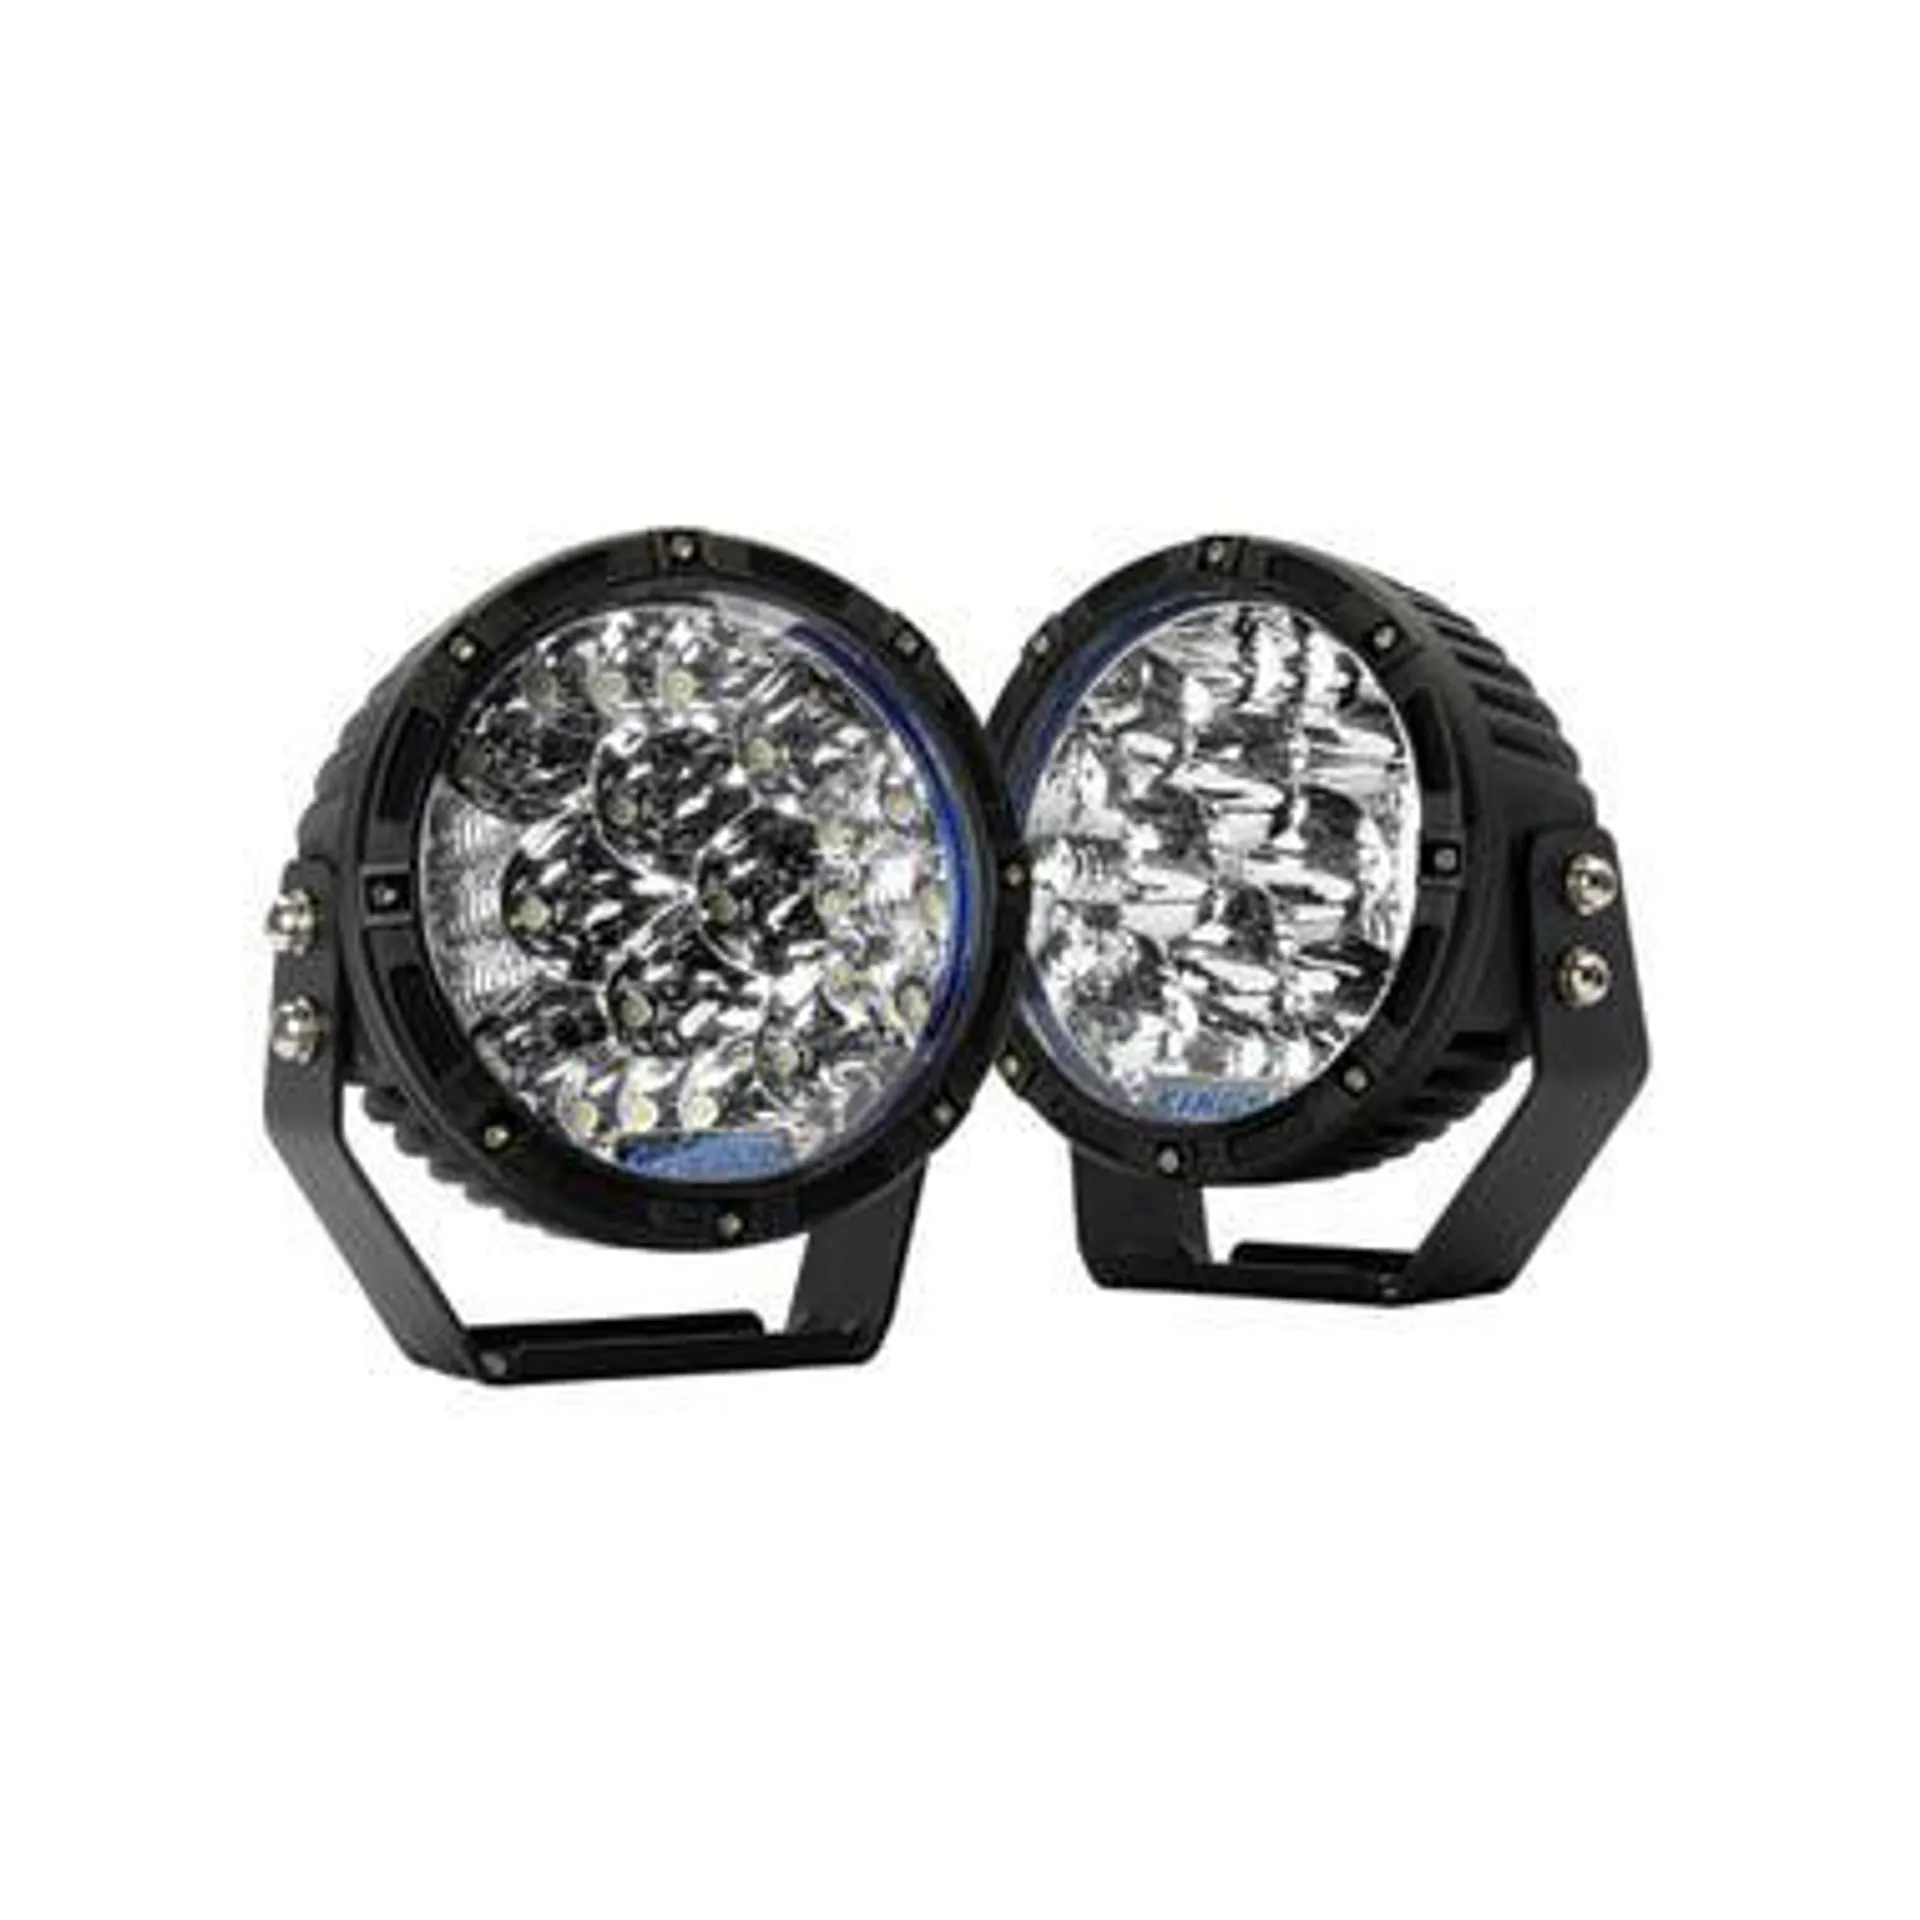 Kings Lethal 7” Premium LED Driving Lights | Fitted with OSRAM LEDs | 11,890 Lumens | 1 Lux @ 845m | Spot Lights